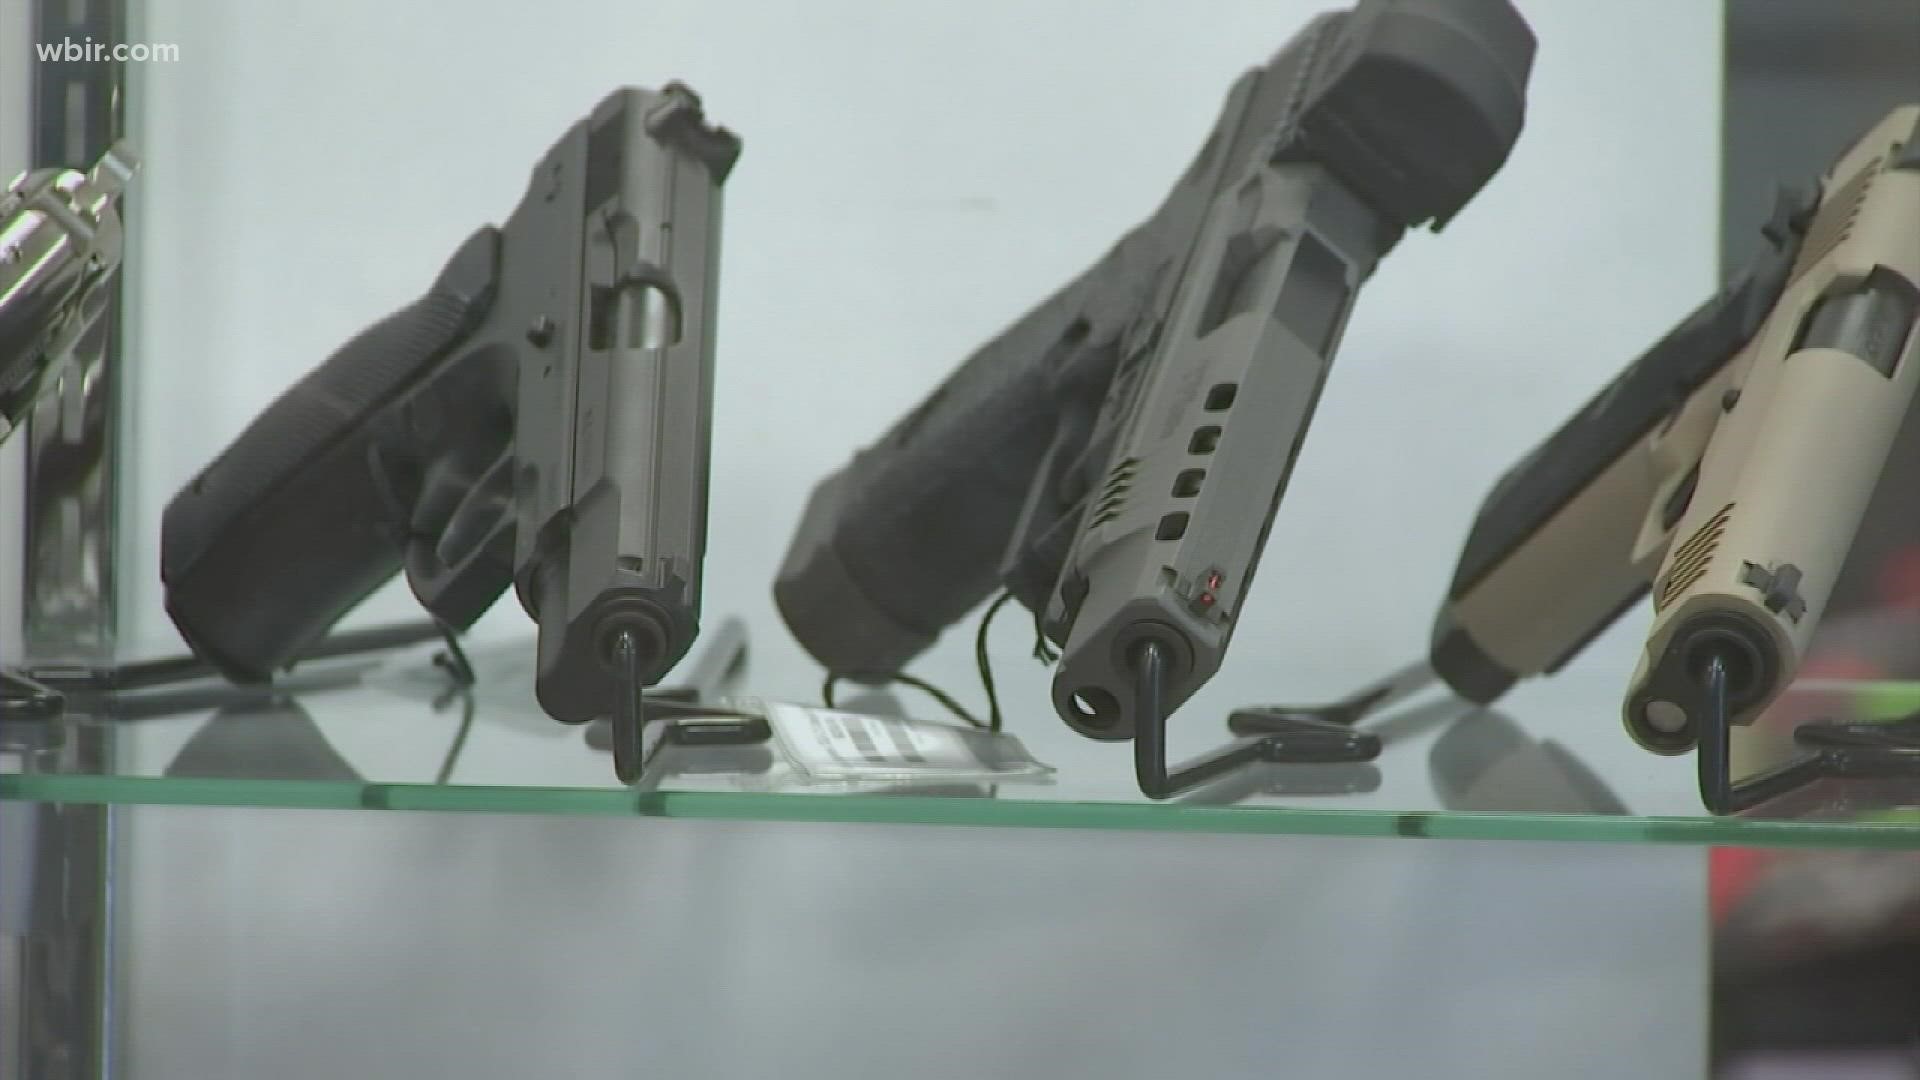 Smith and Wesson plan to move to Blount County, and instead of paying traditional taxes, they signed a PILOT lease with the local government there.